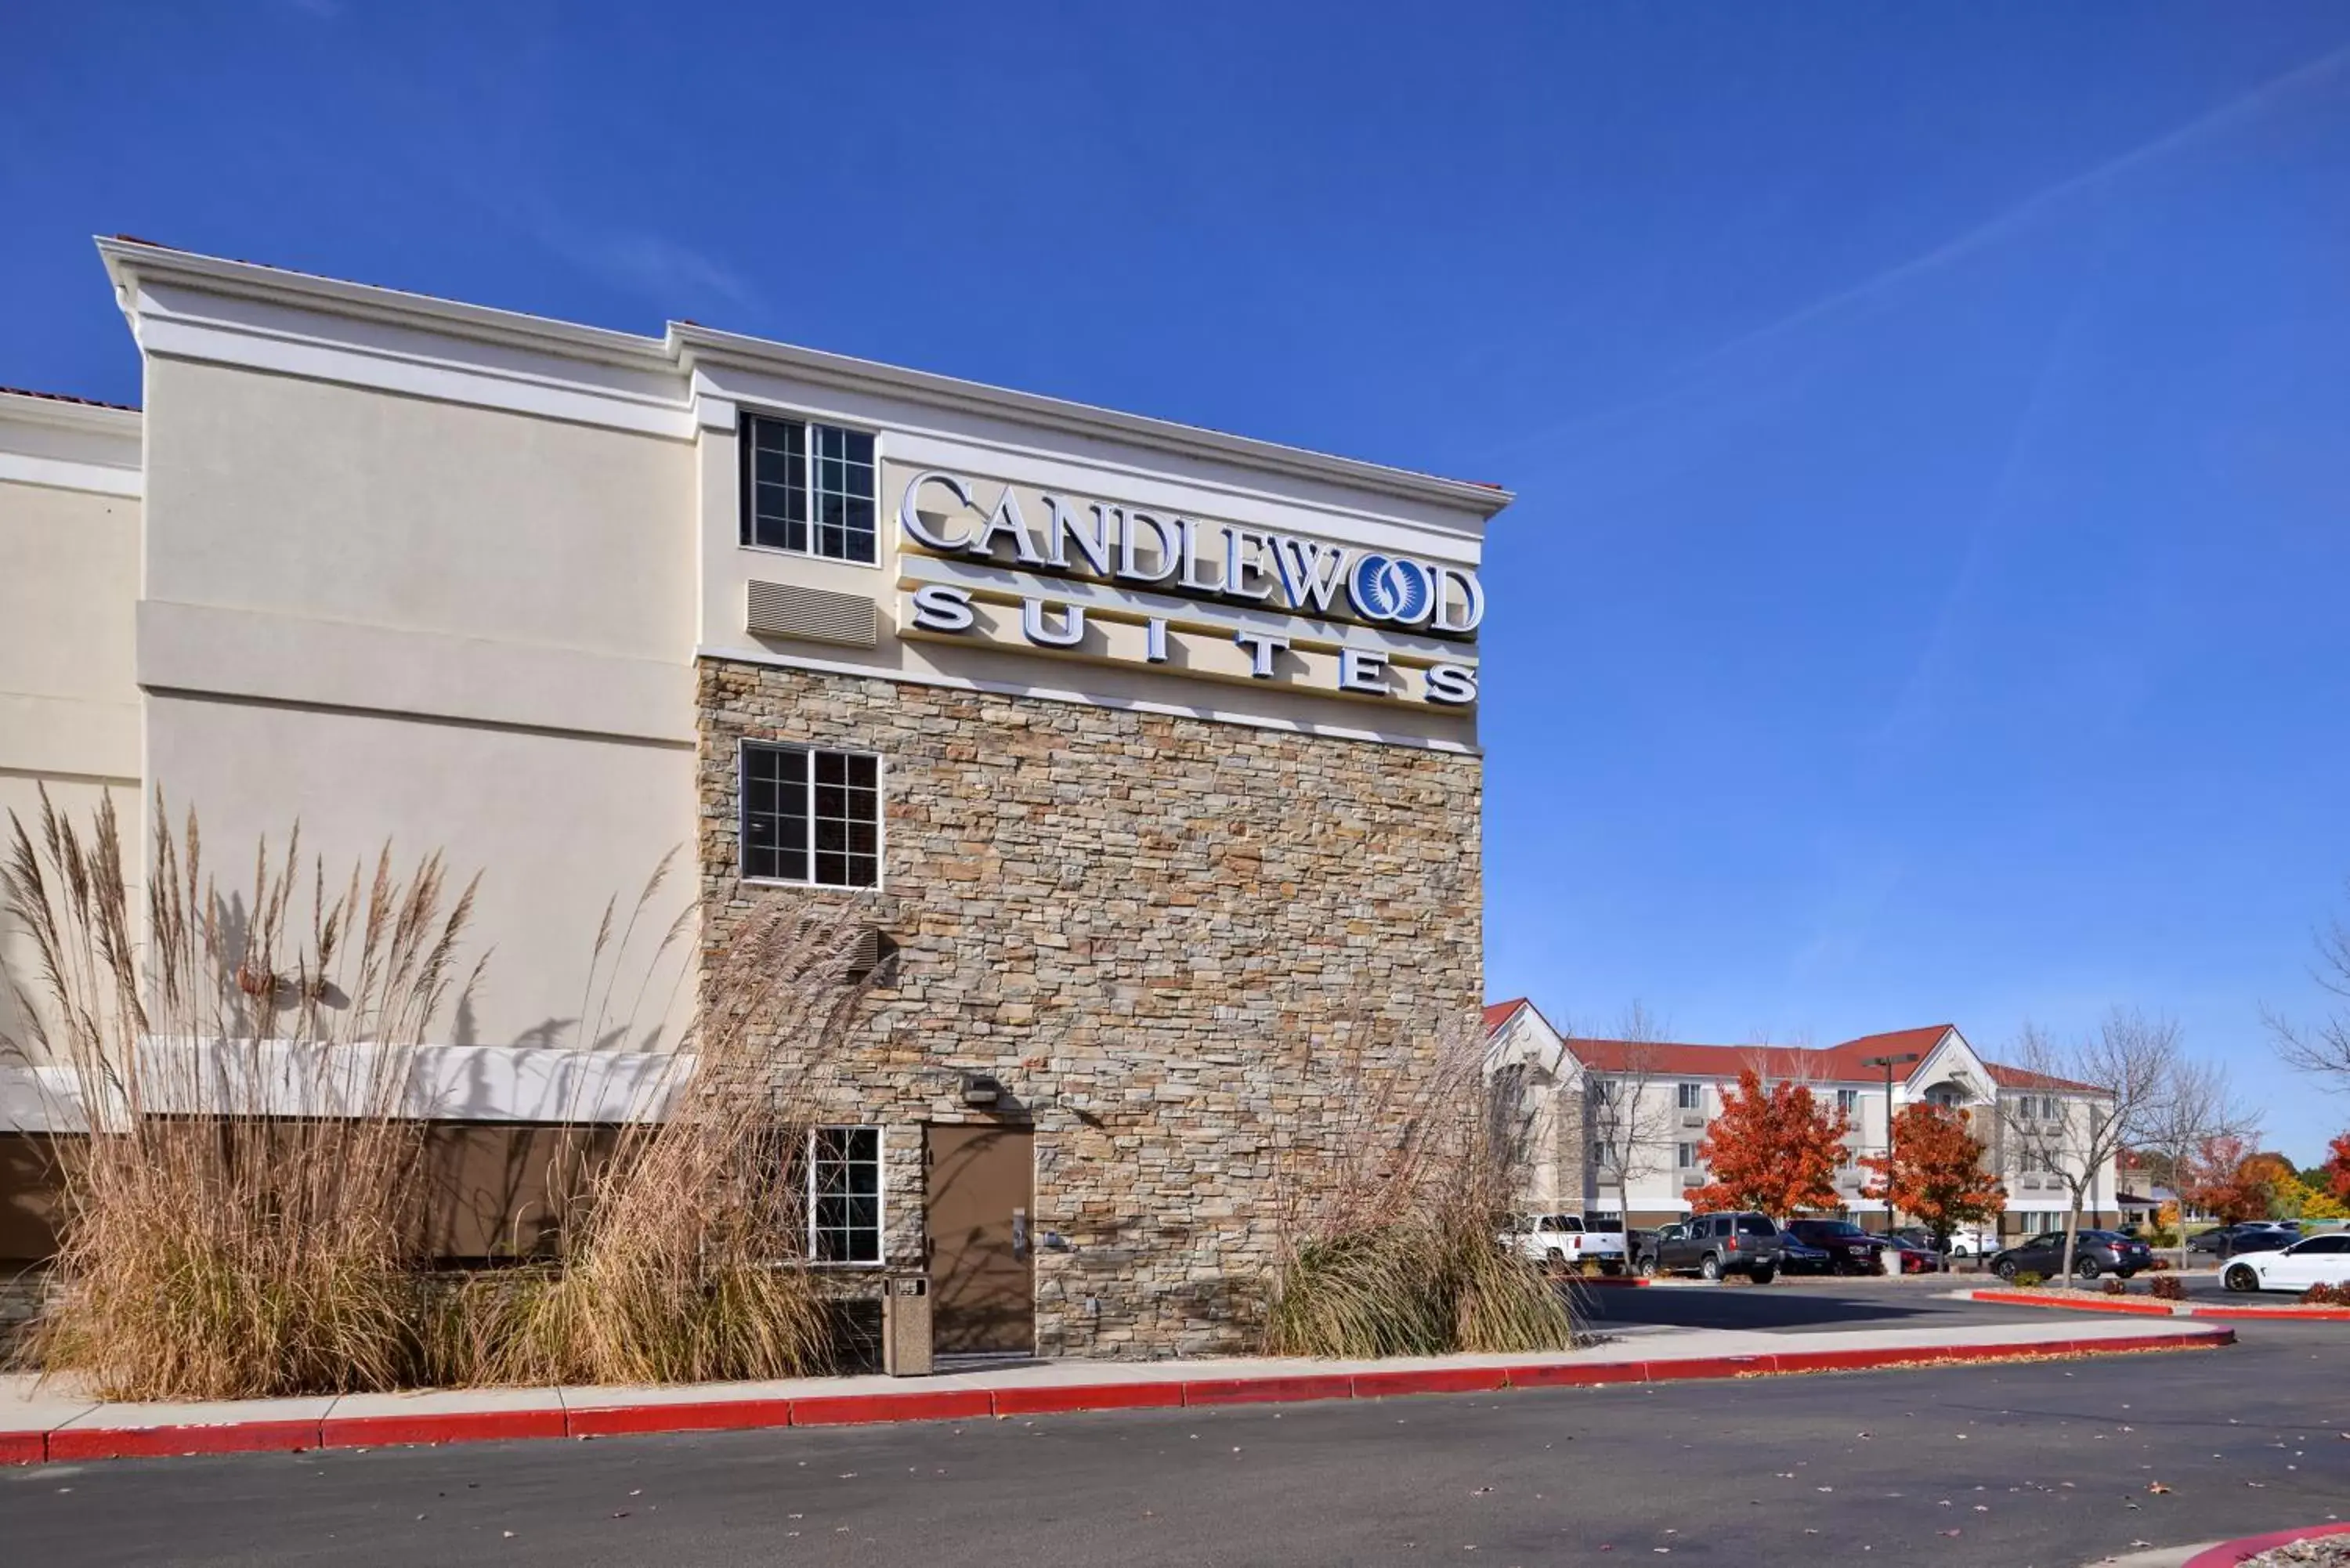 Property Building in Candlewood Suites Boise-Meridian, an IHG Hotel